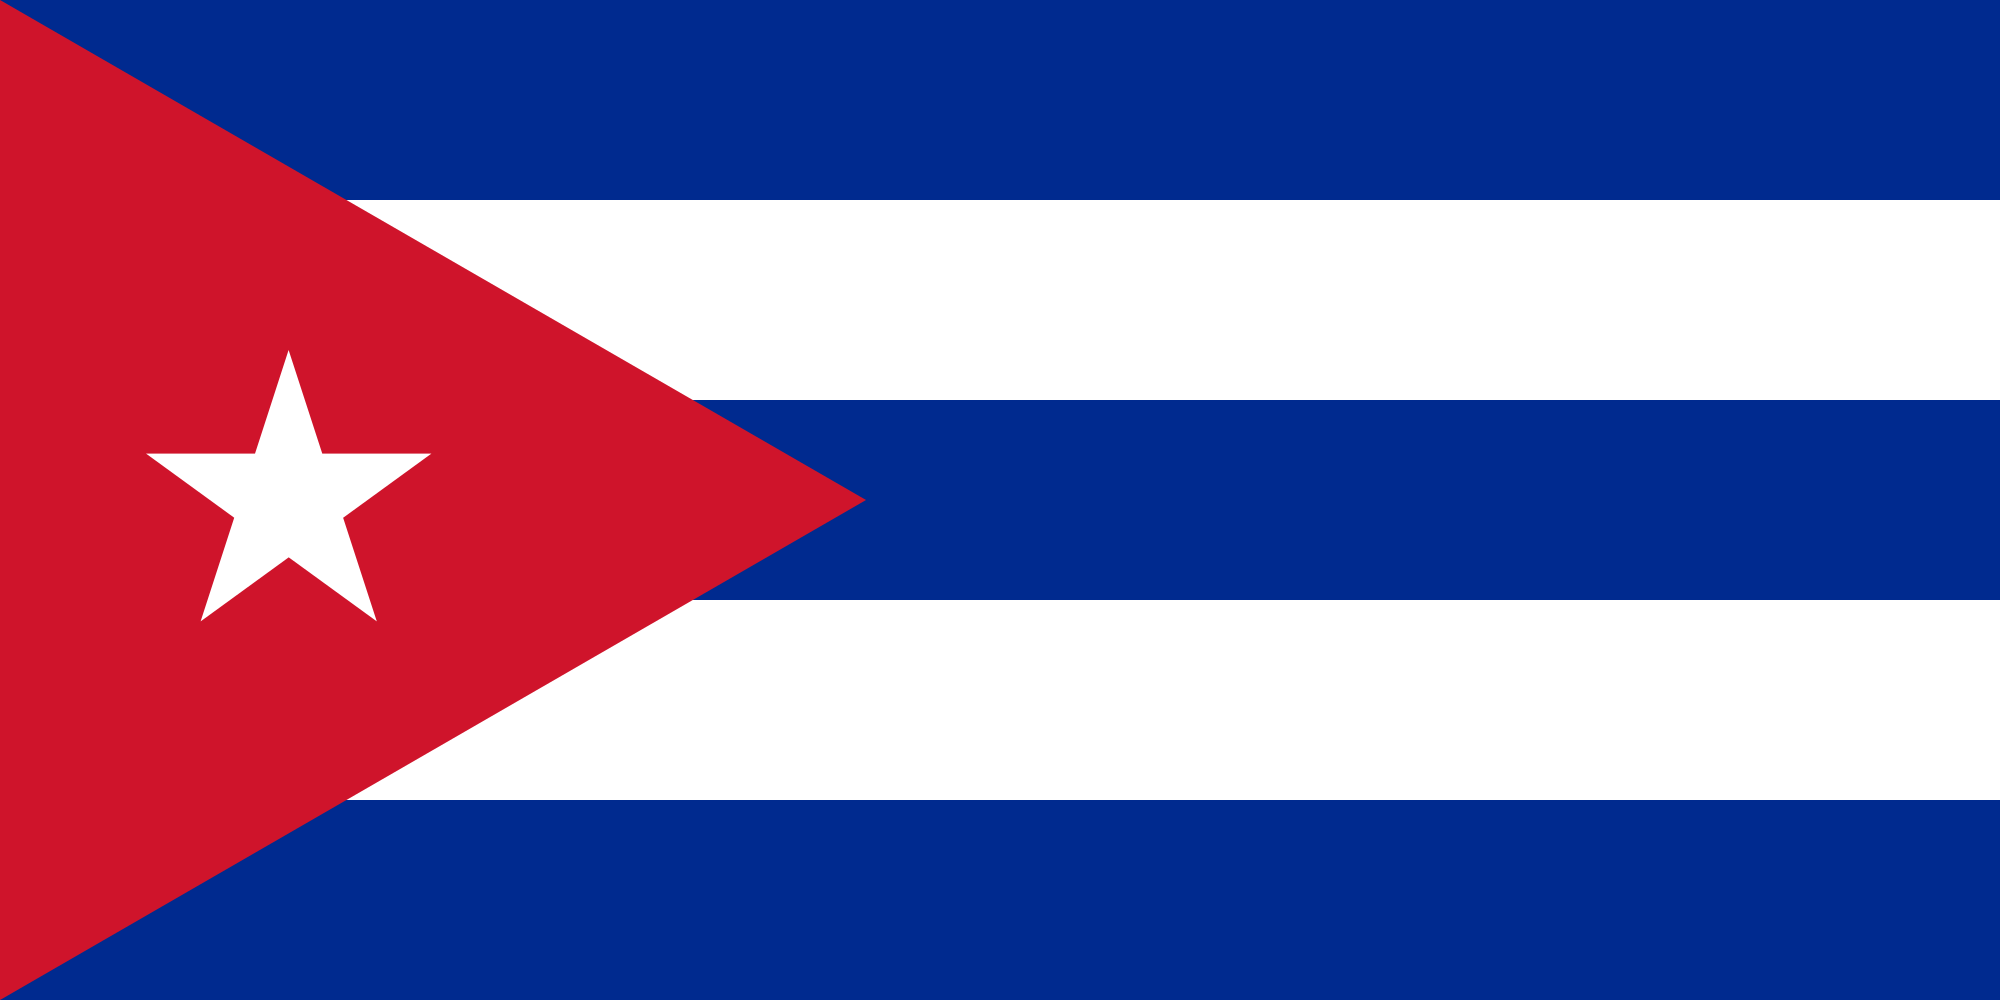 File:The Flag of the Republic of Cuba.png